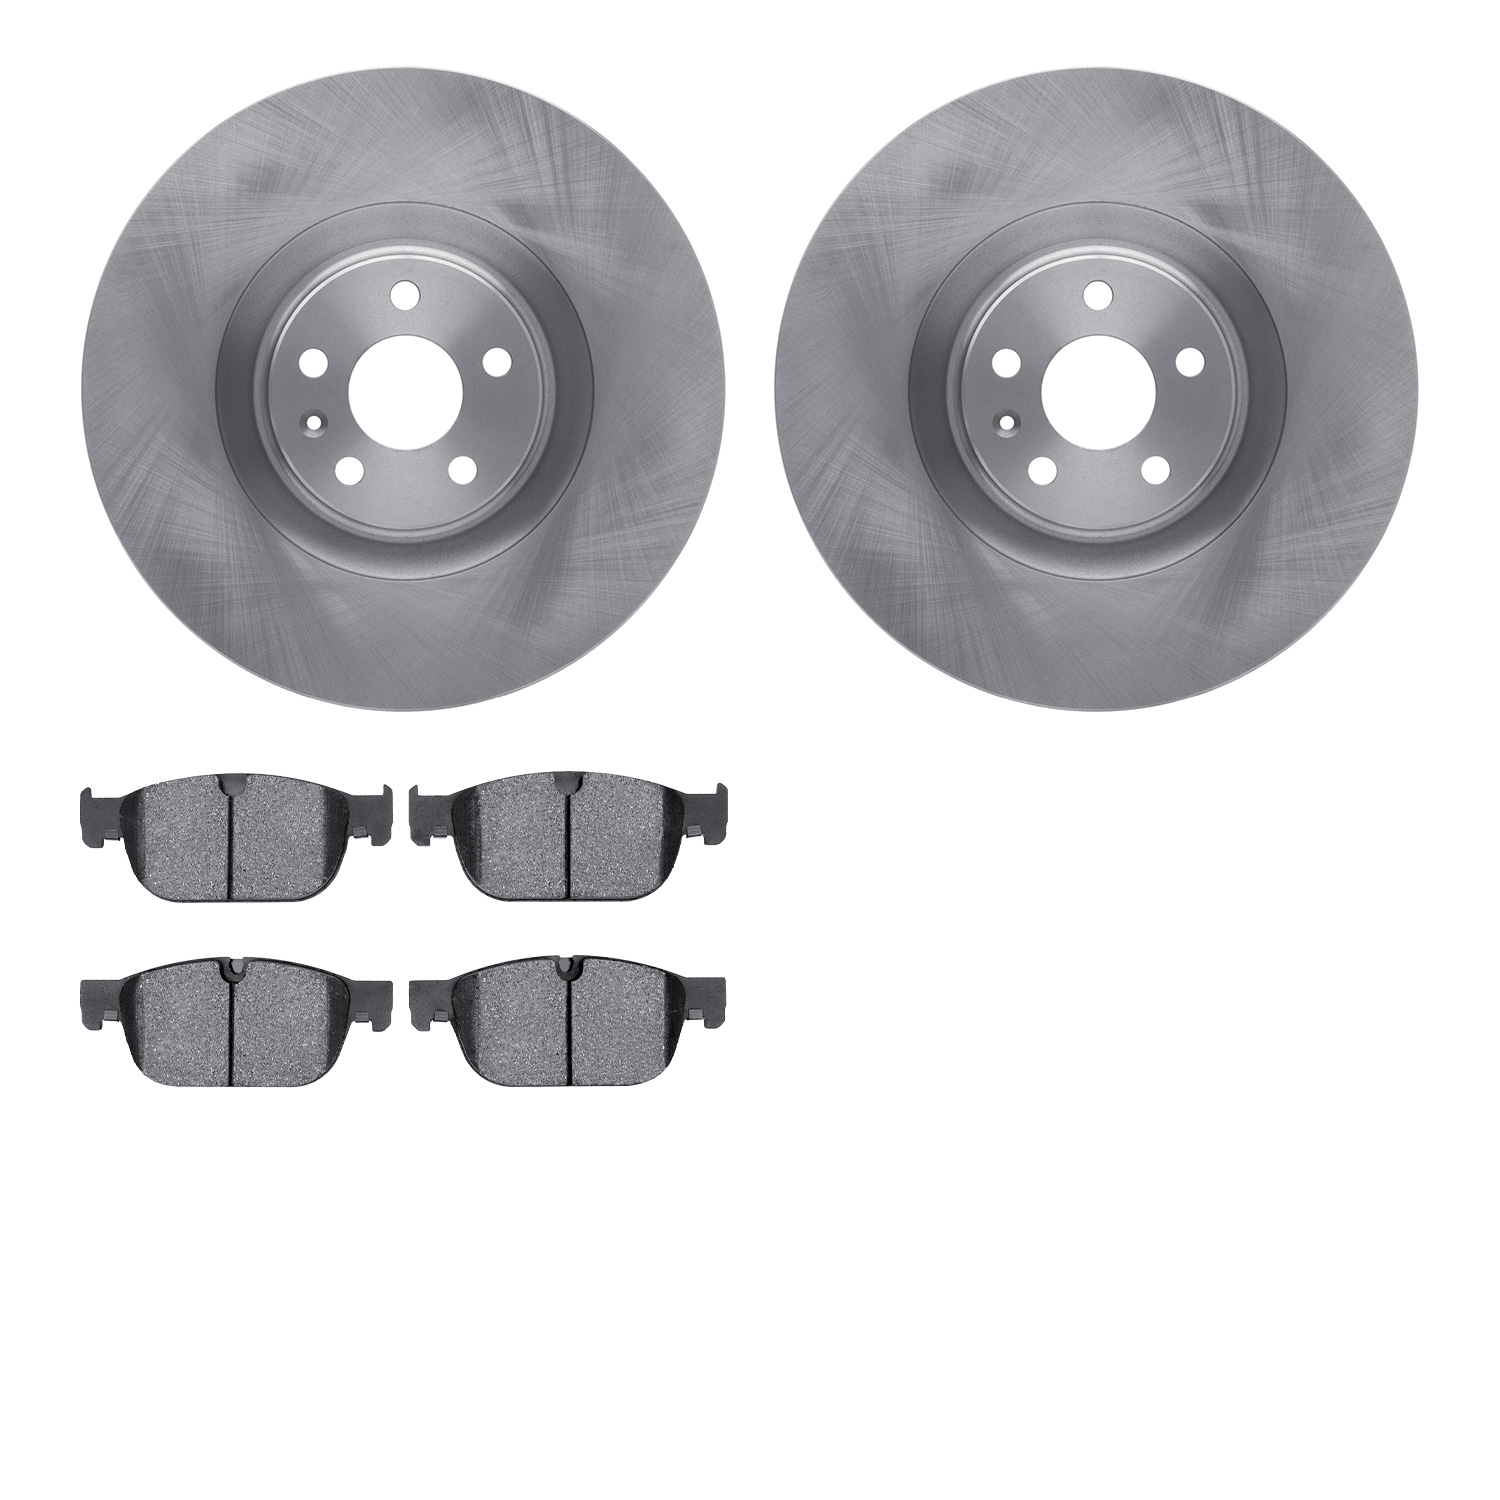 6302-27075 Brake Rotors with 3000-Series Ceramic Brake Pads Kit, Fits Select Volvo, Position: Front